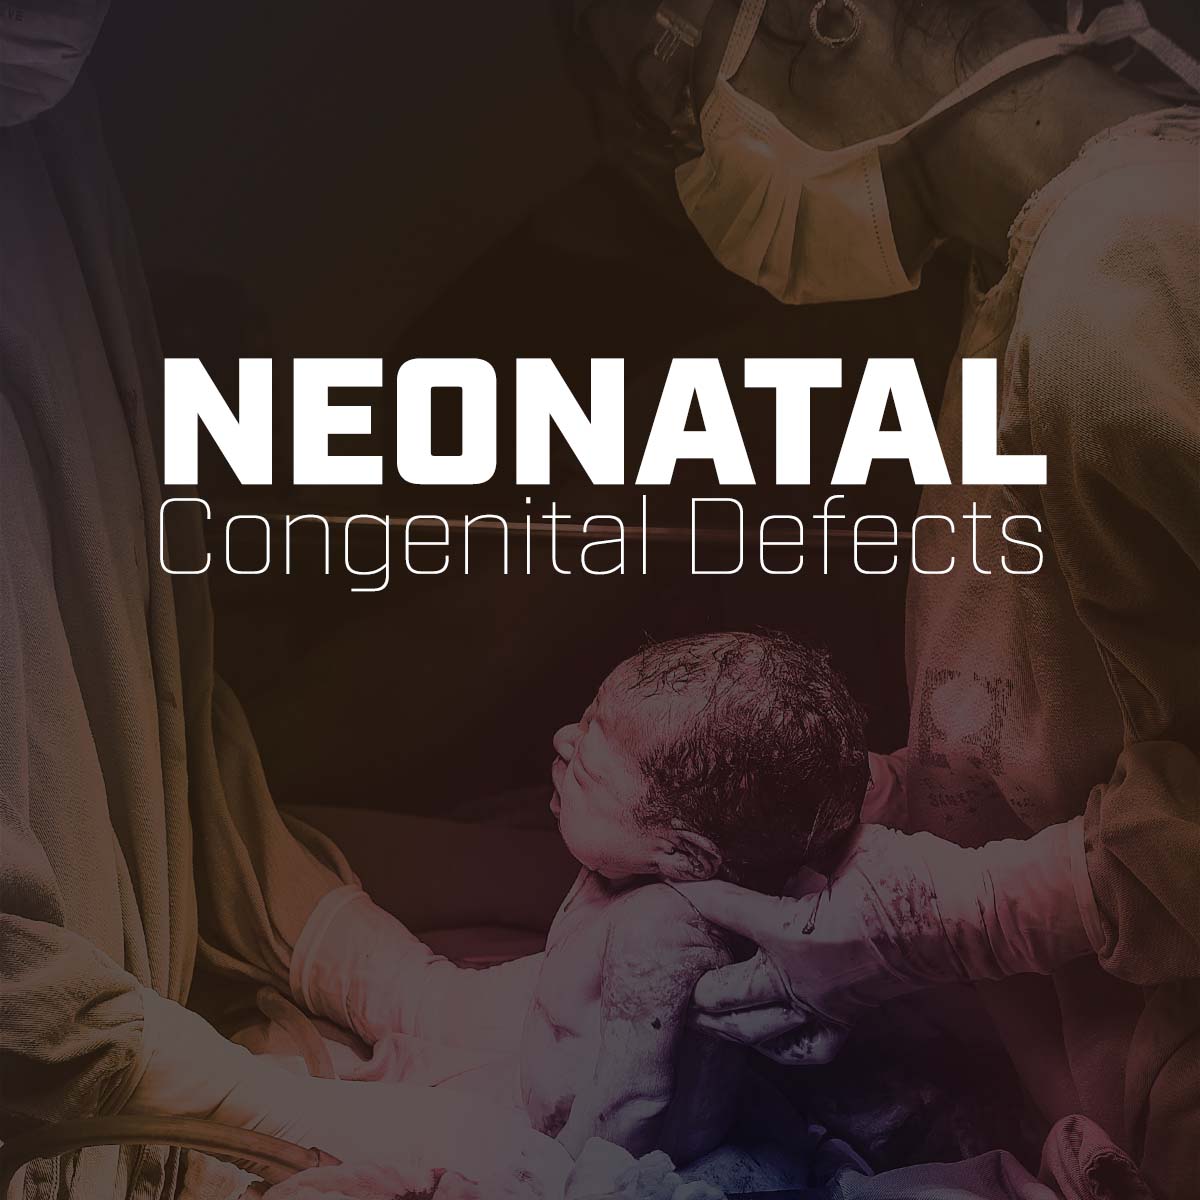 Neonatal Congenital Defects: Podcast Subscription